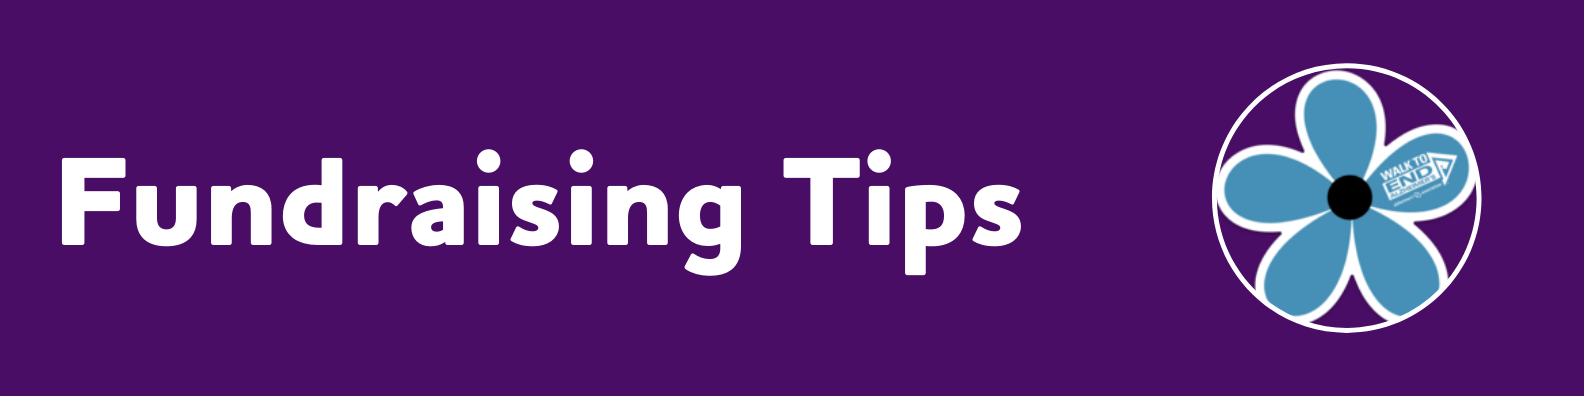 2 - Fundraising Tips.png